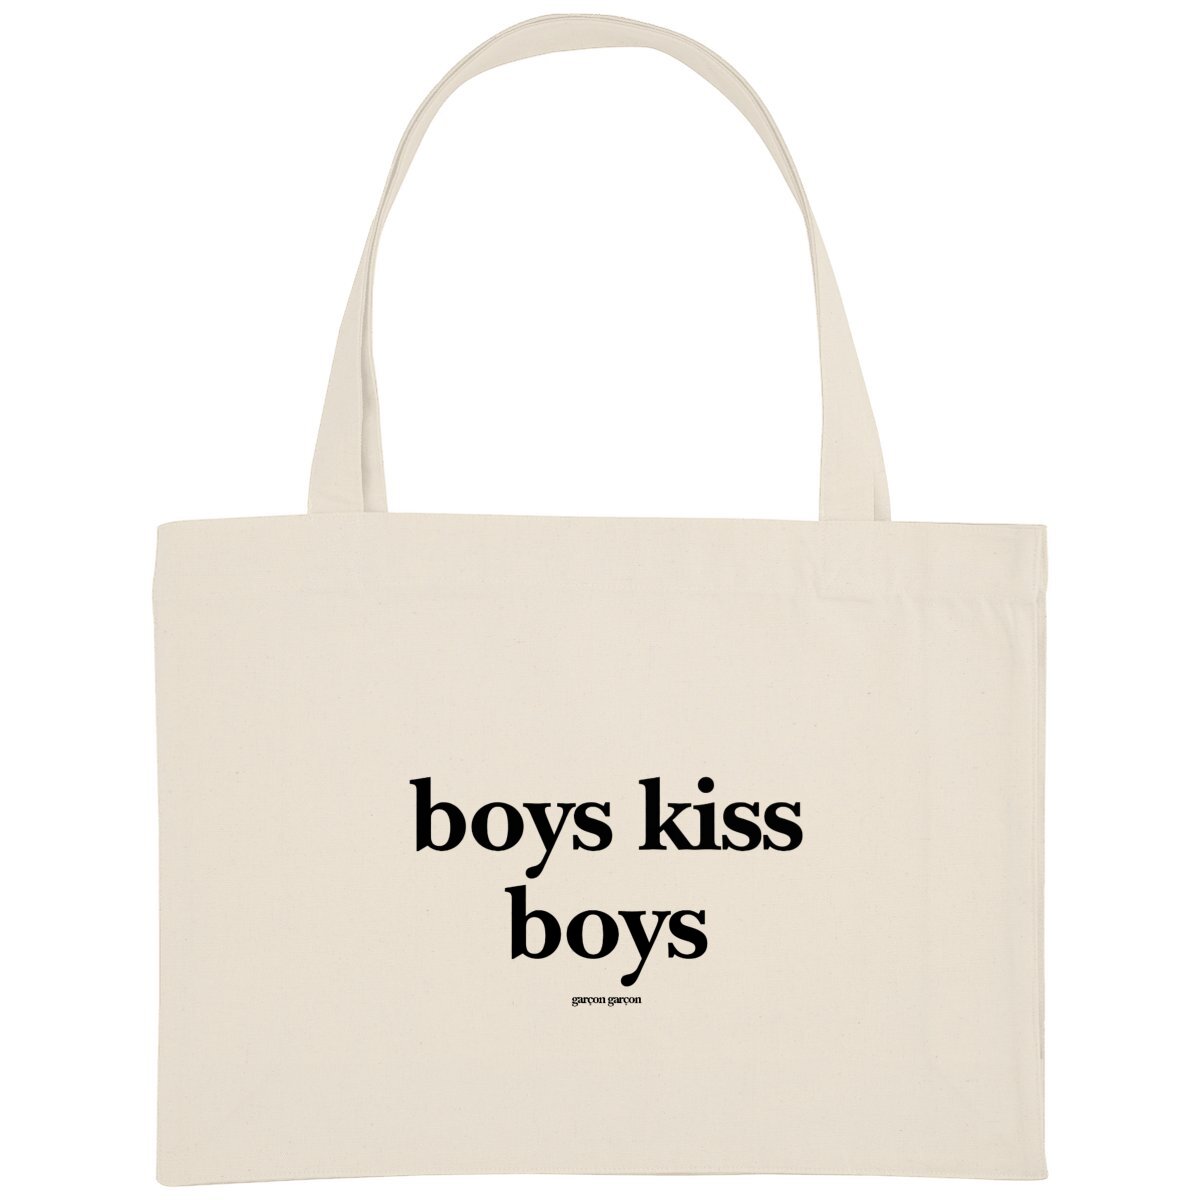 boys kiss boys tote bag. An eco-friendly cream-colored tote bag featuring the bold statement 'boys kiss boys' in black typography, with the brand name 'garçon garçon' subtly placed underneath. A modern accessory that carries more than just your essentials—it carries a message of love and equality.